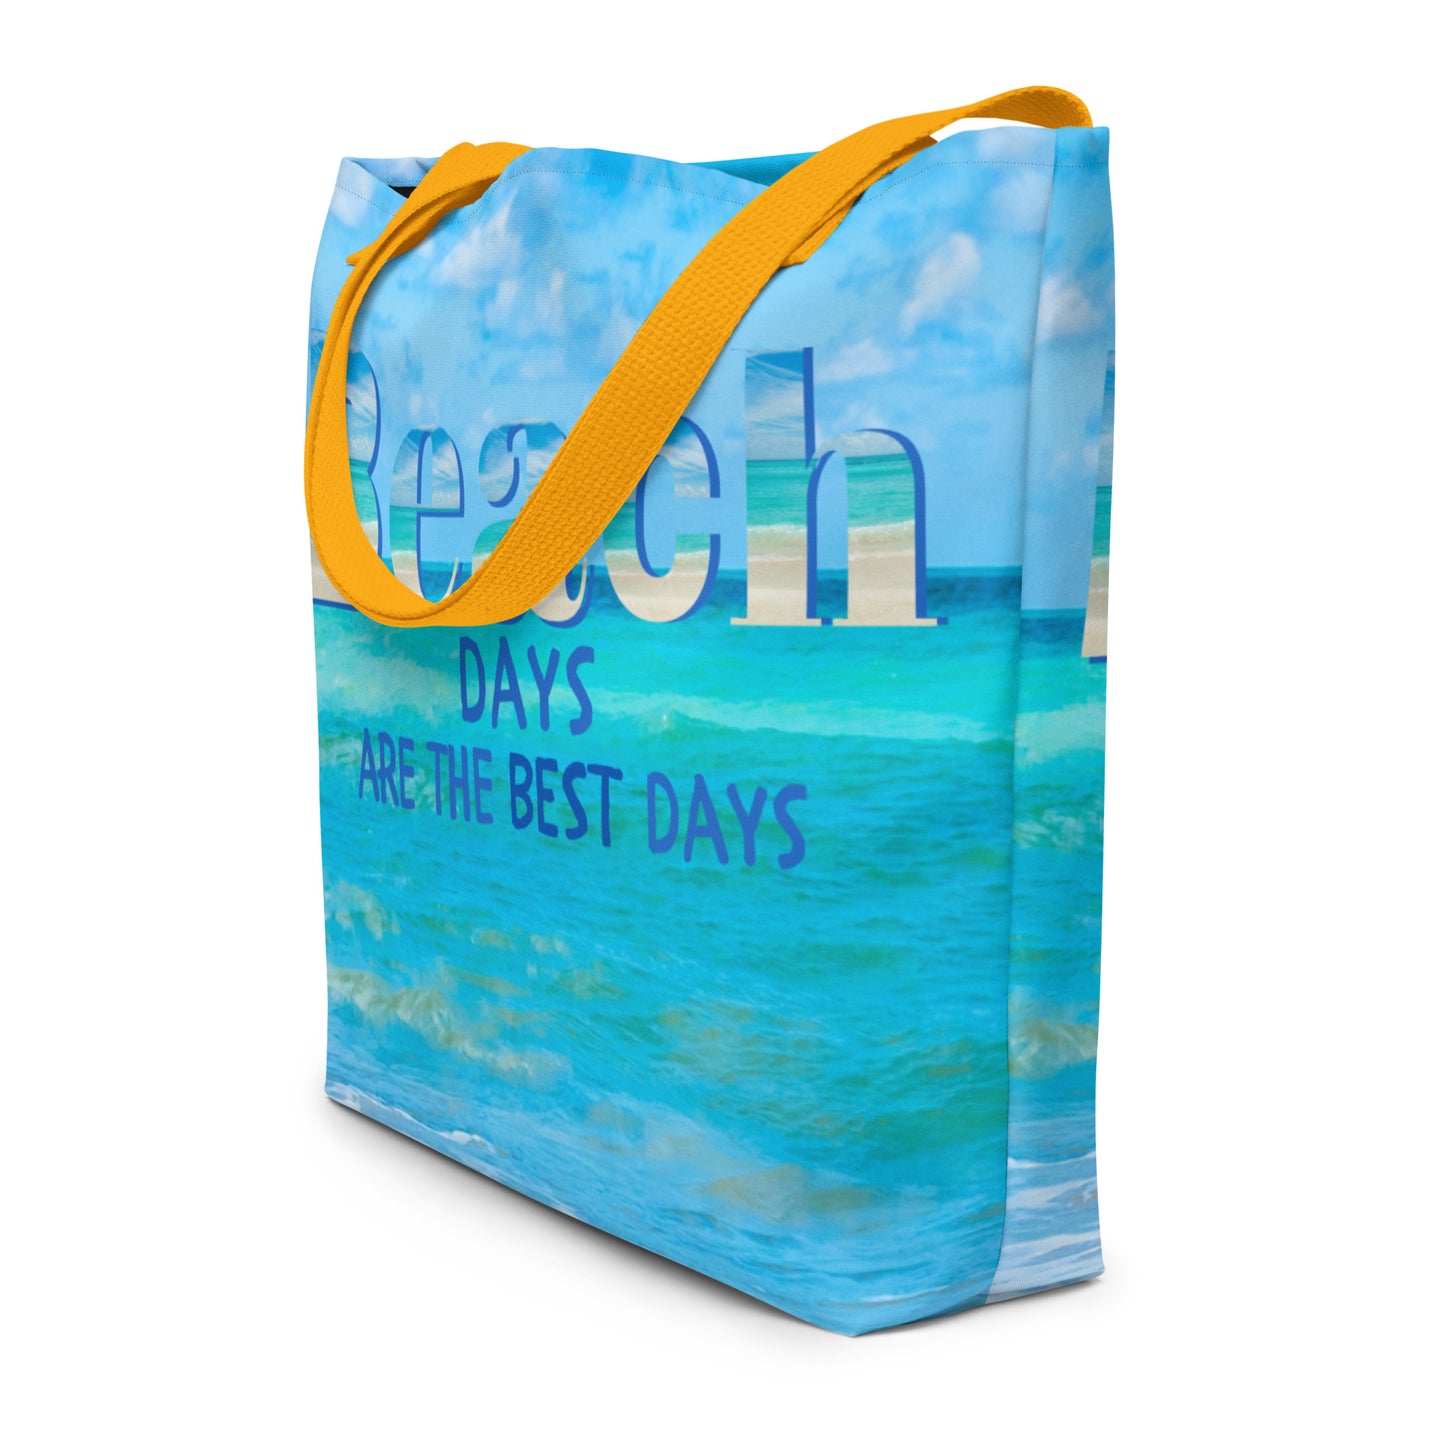 All-Over Print Large Tote Bag with Pocket - Beach Days are the Best Days